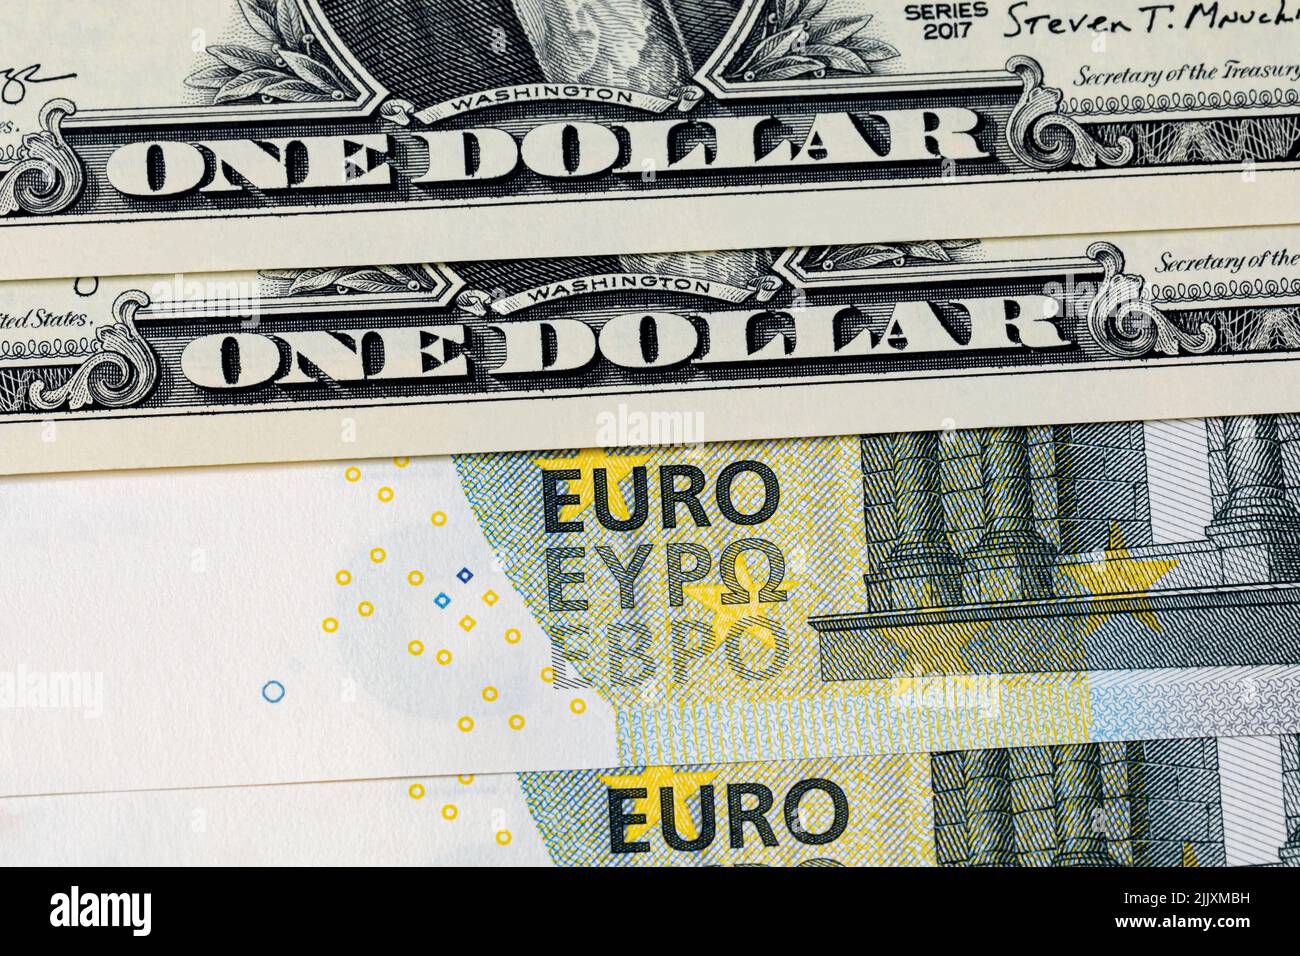 U.S. dollar bills and Euro banknote. Currency exchange rate, value and economy concept. Stock Photo